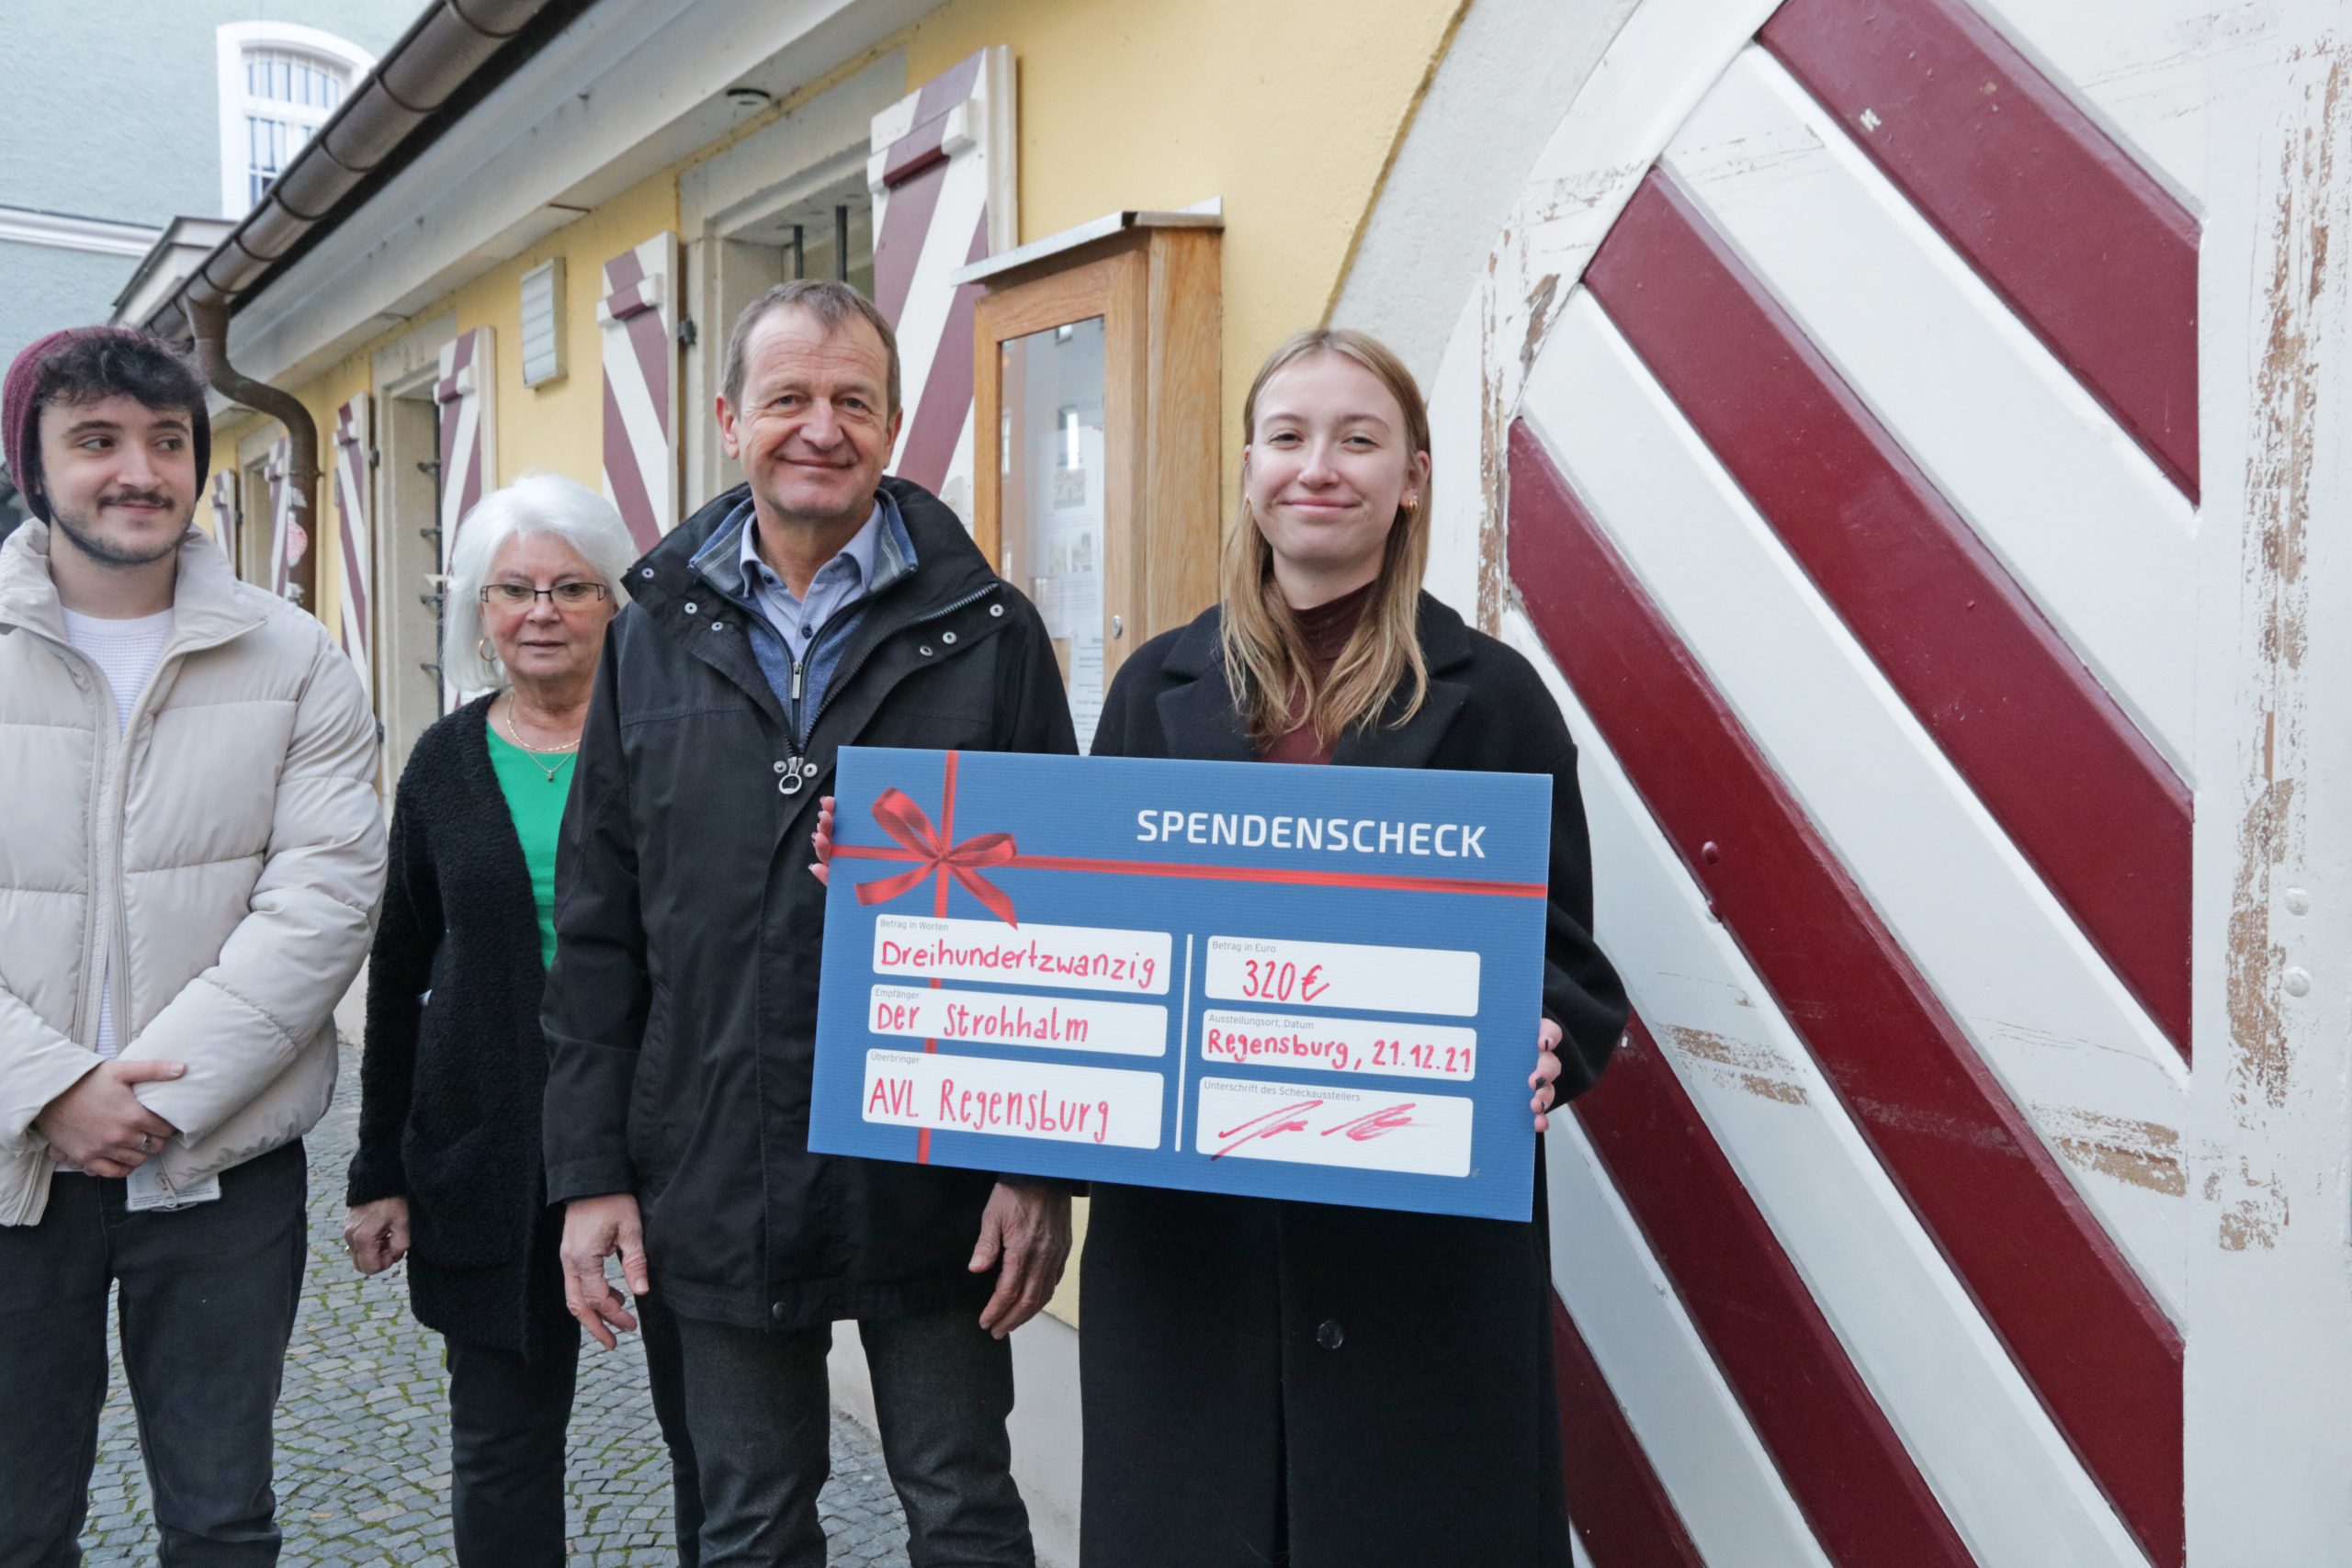 A trainee with the donation check to Strohhalm